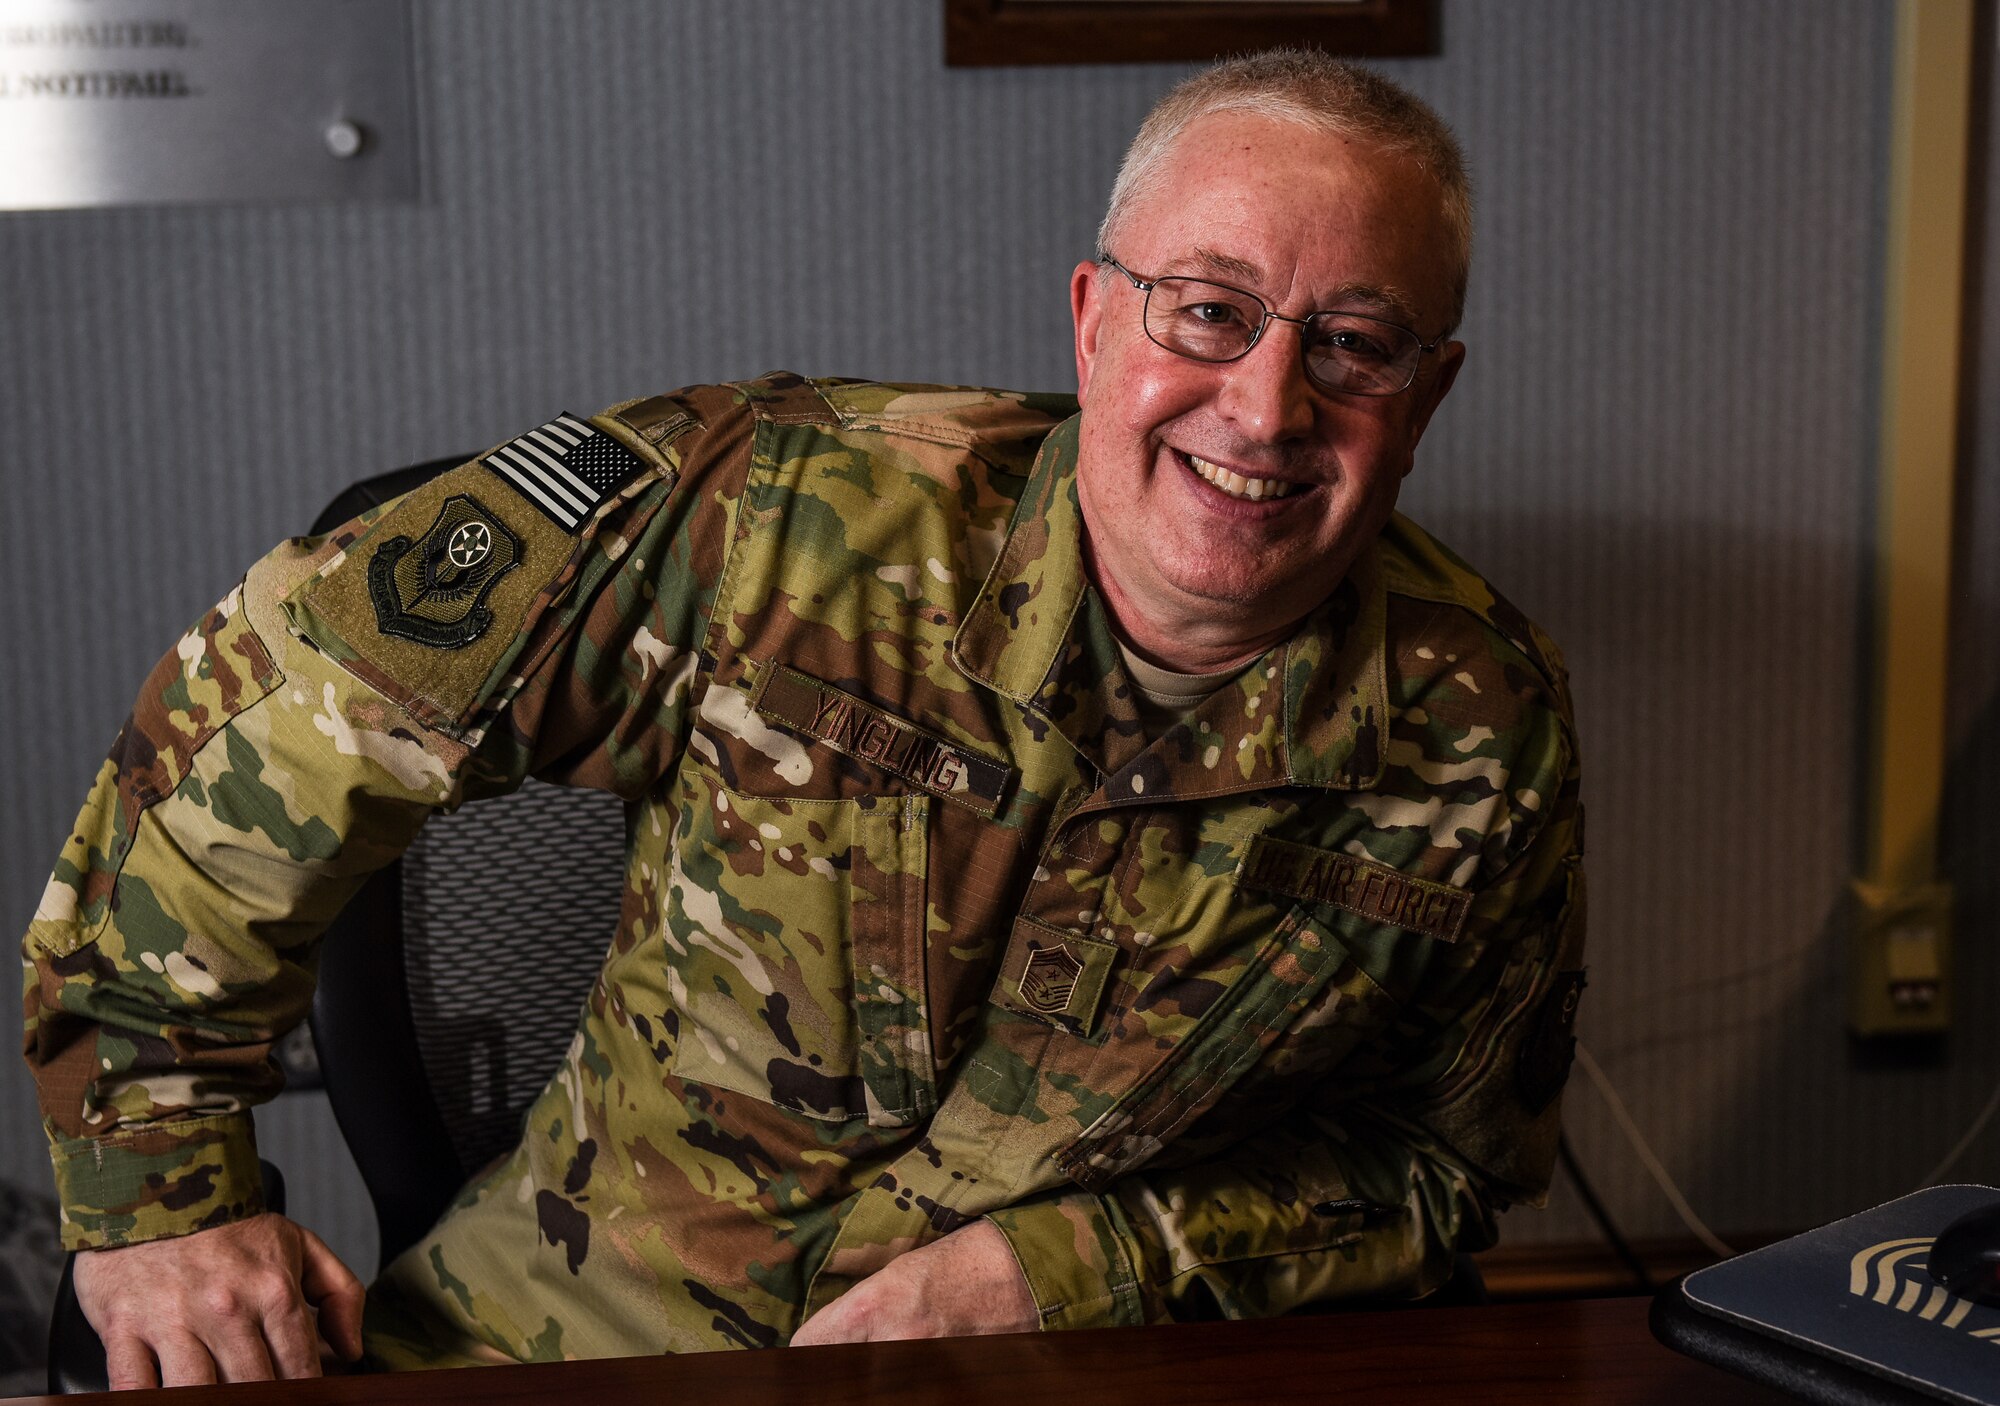 Chief Master Sgt. Bill Yingling poses for a portrait.